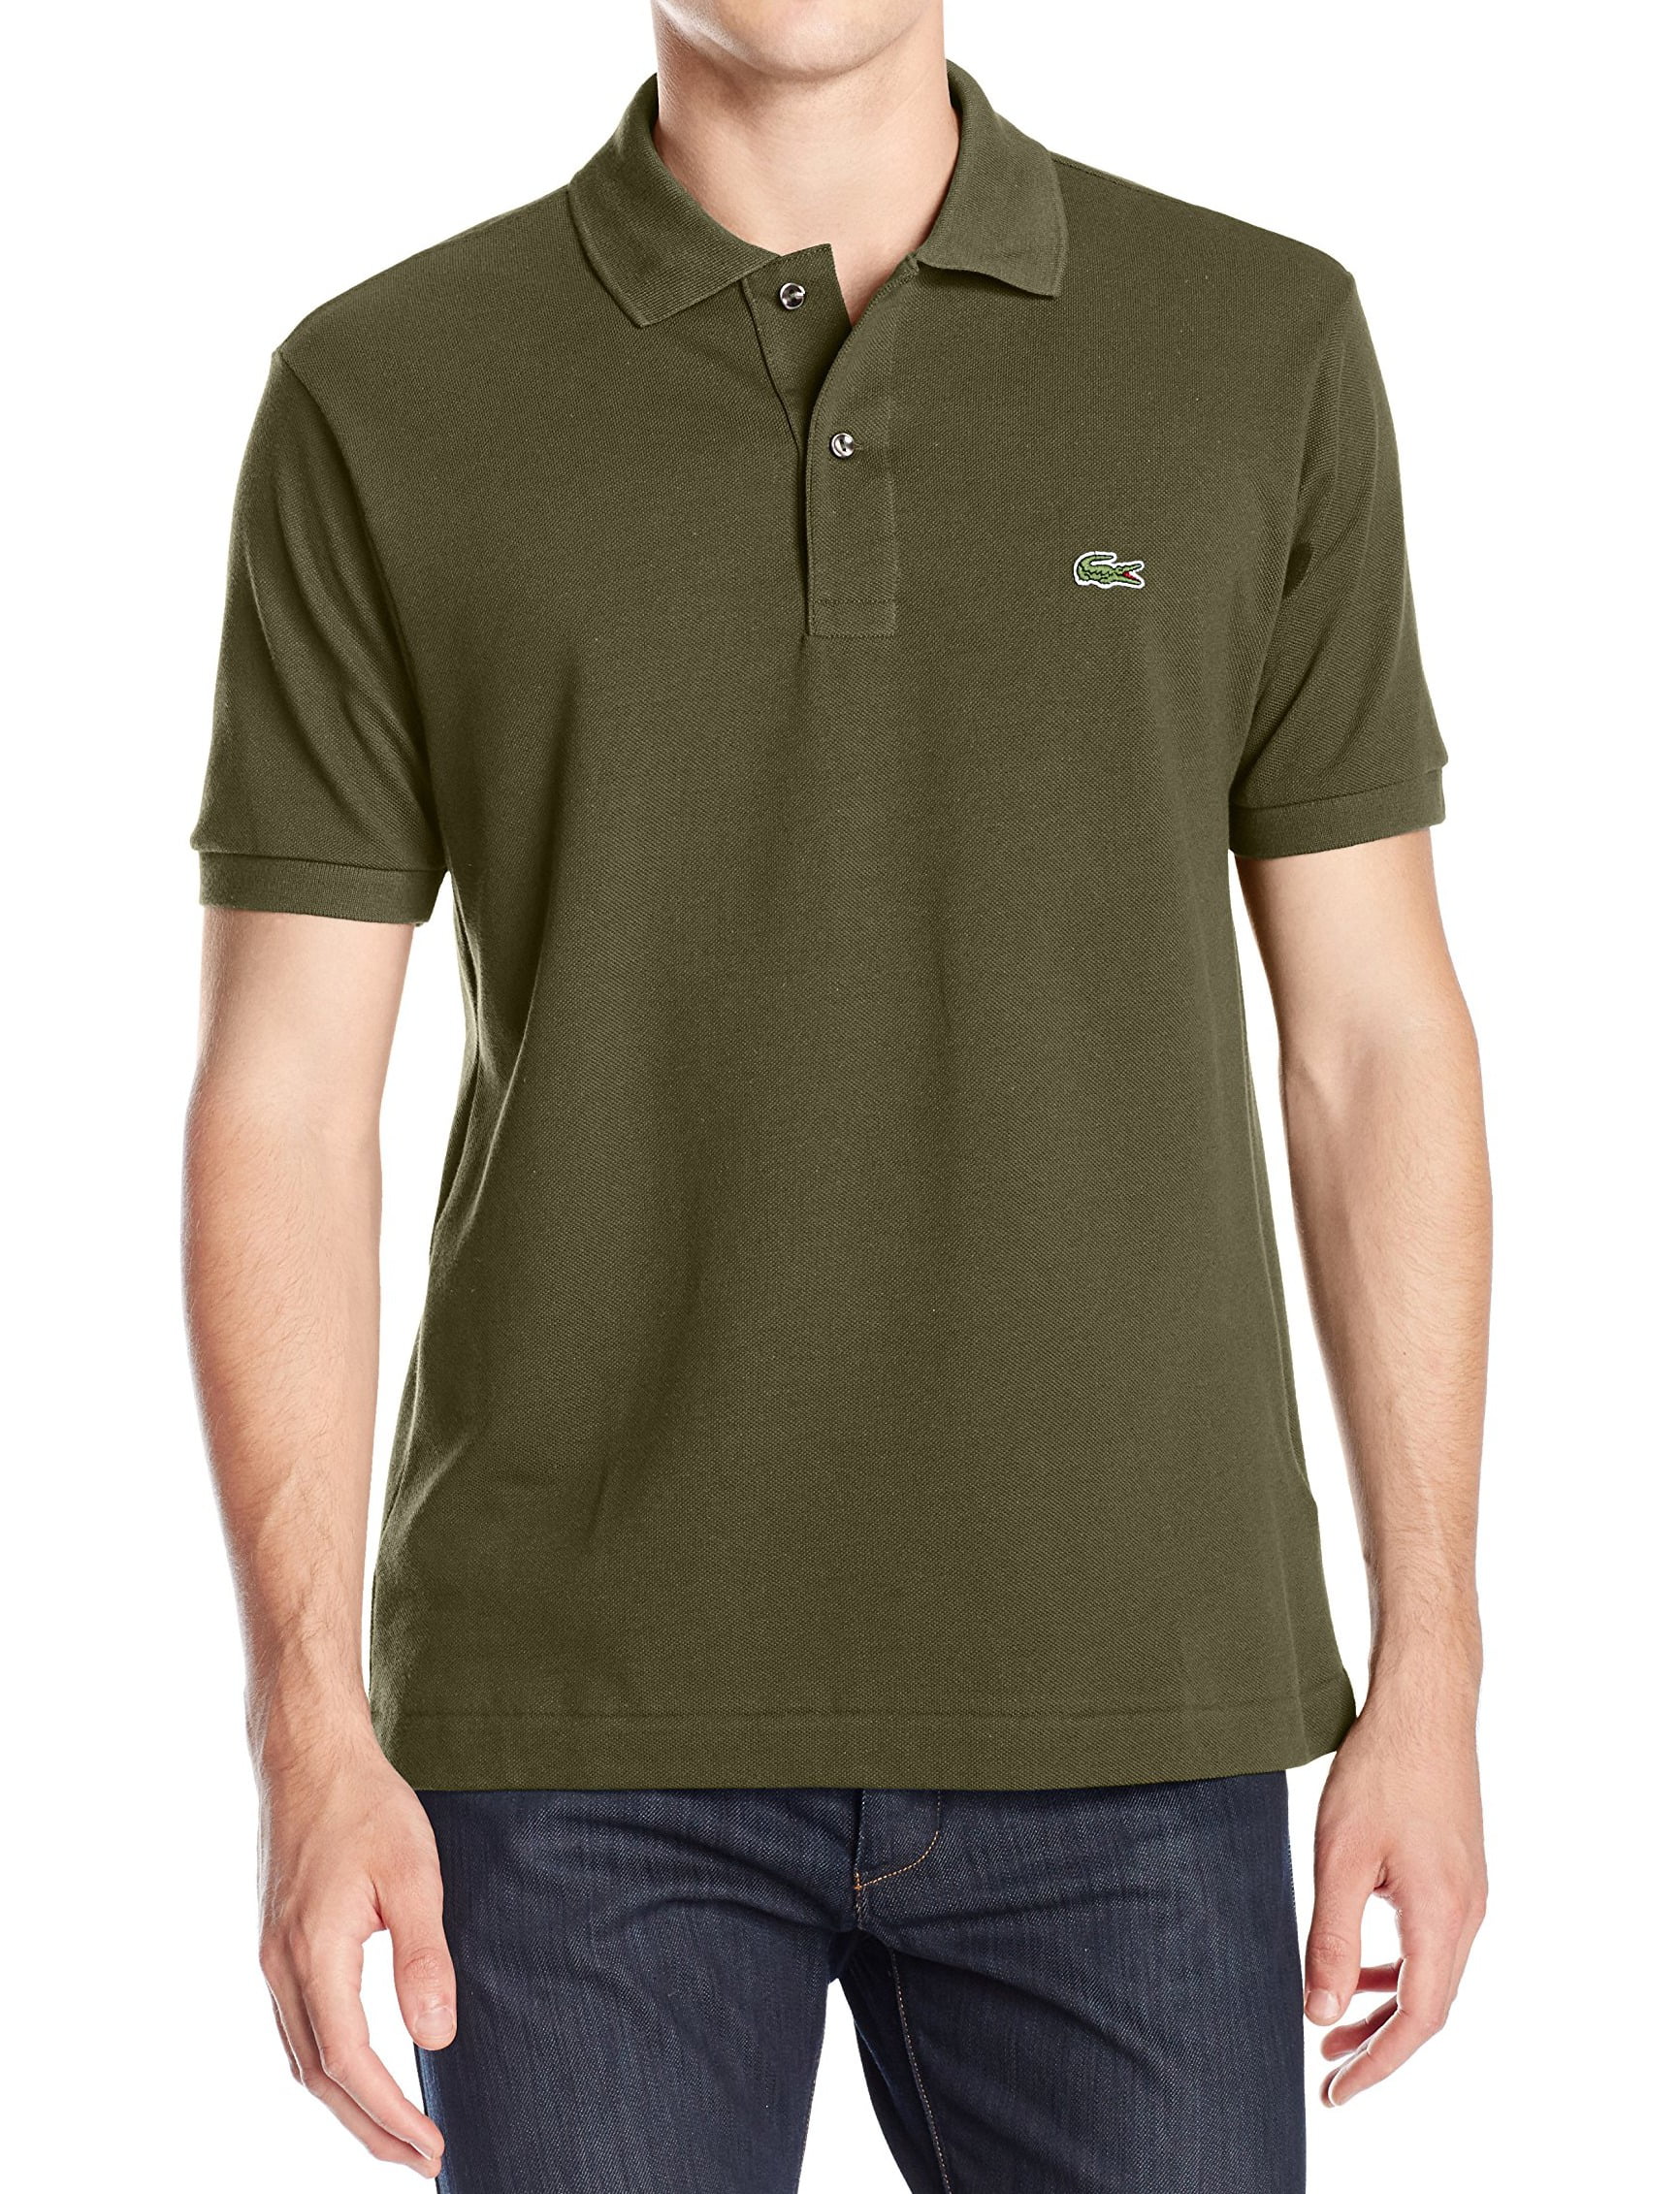 Lacoste NEW Olive Green Mens Size XL 